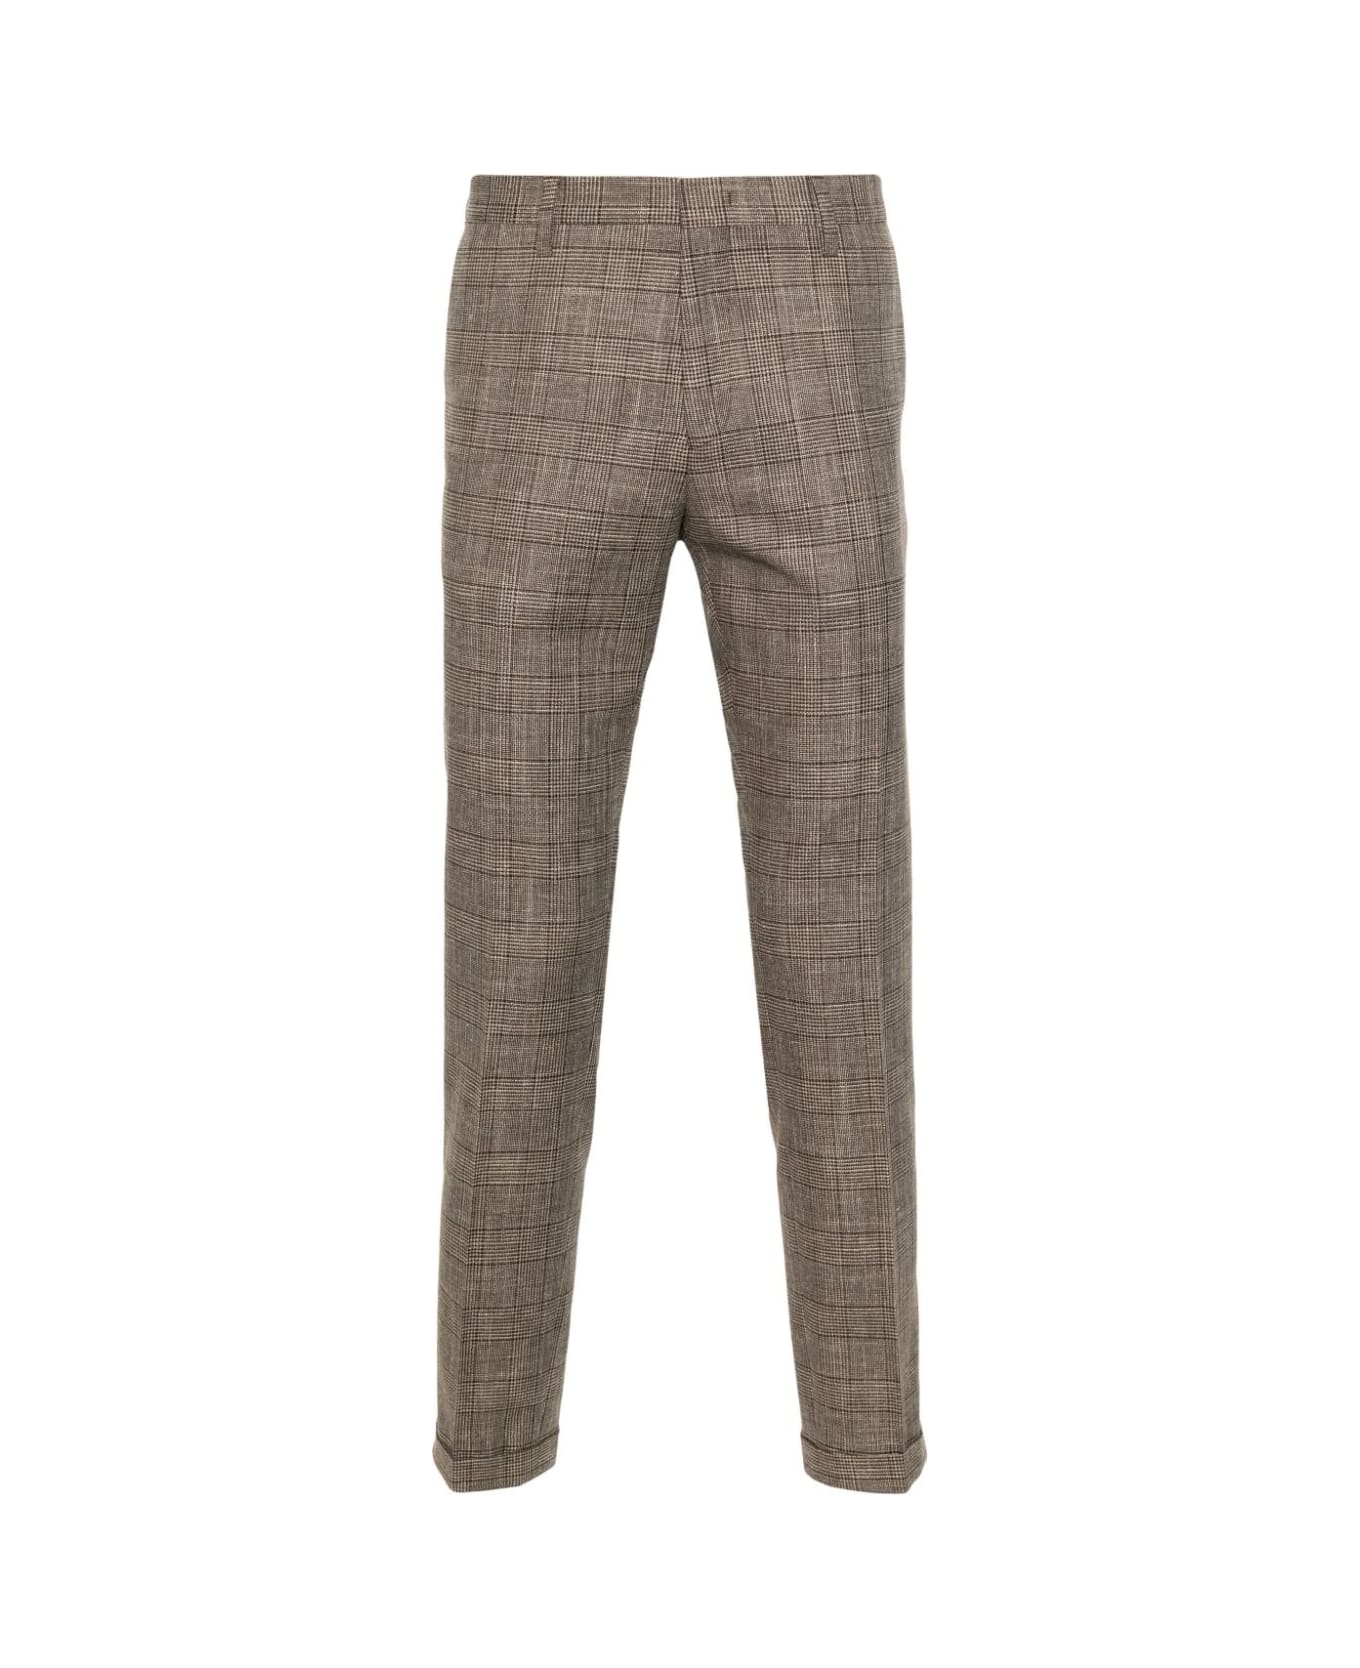 Paul Smith Mens Trousers - Brown ボトムス